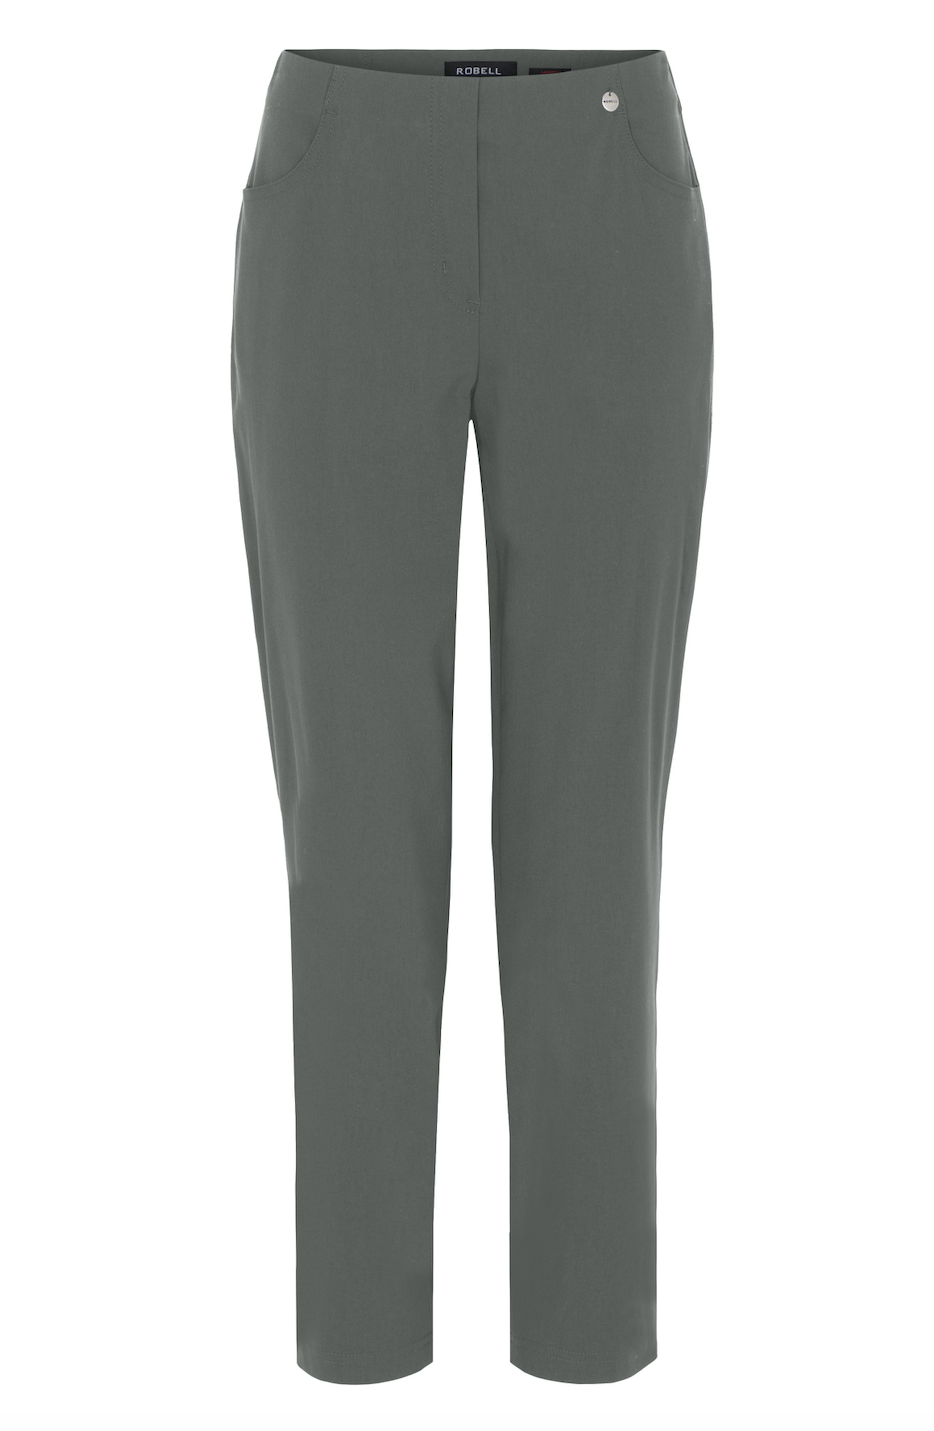 Robell Bella Charcoal Slim 68cm Length Trousers (No Turn-Up)